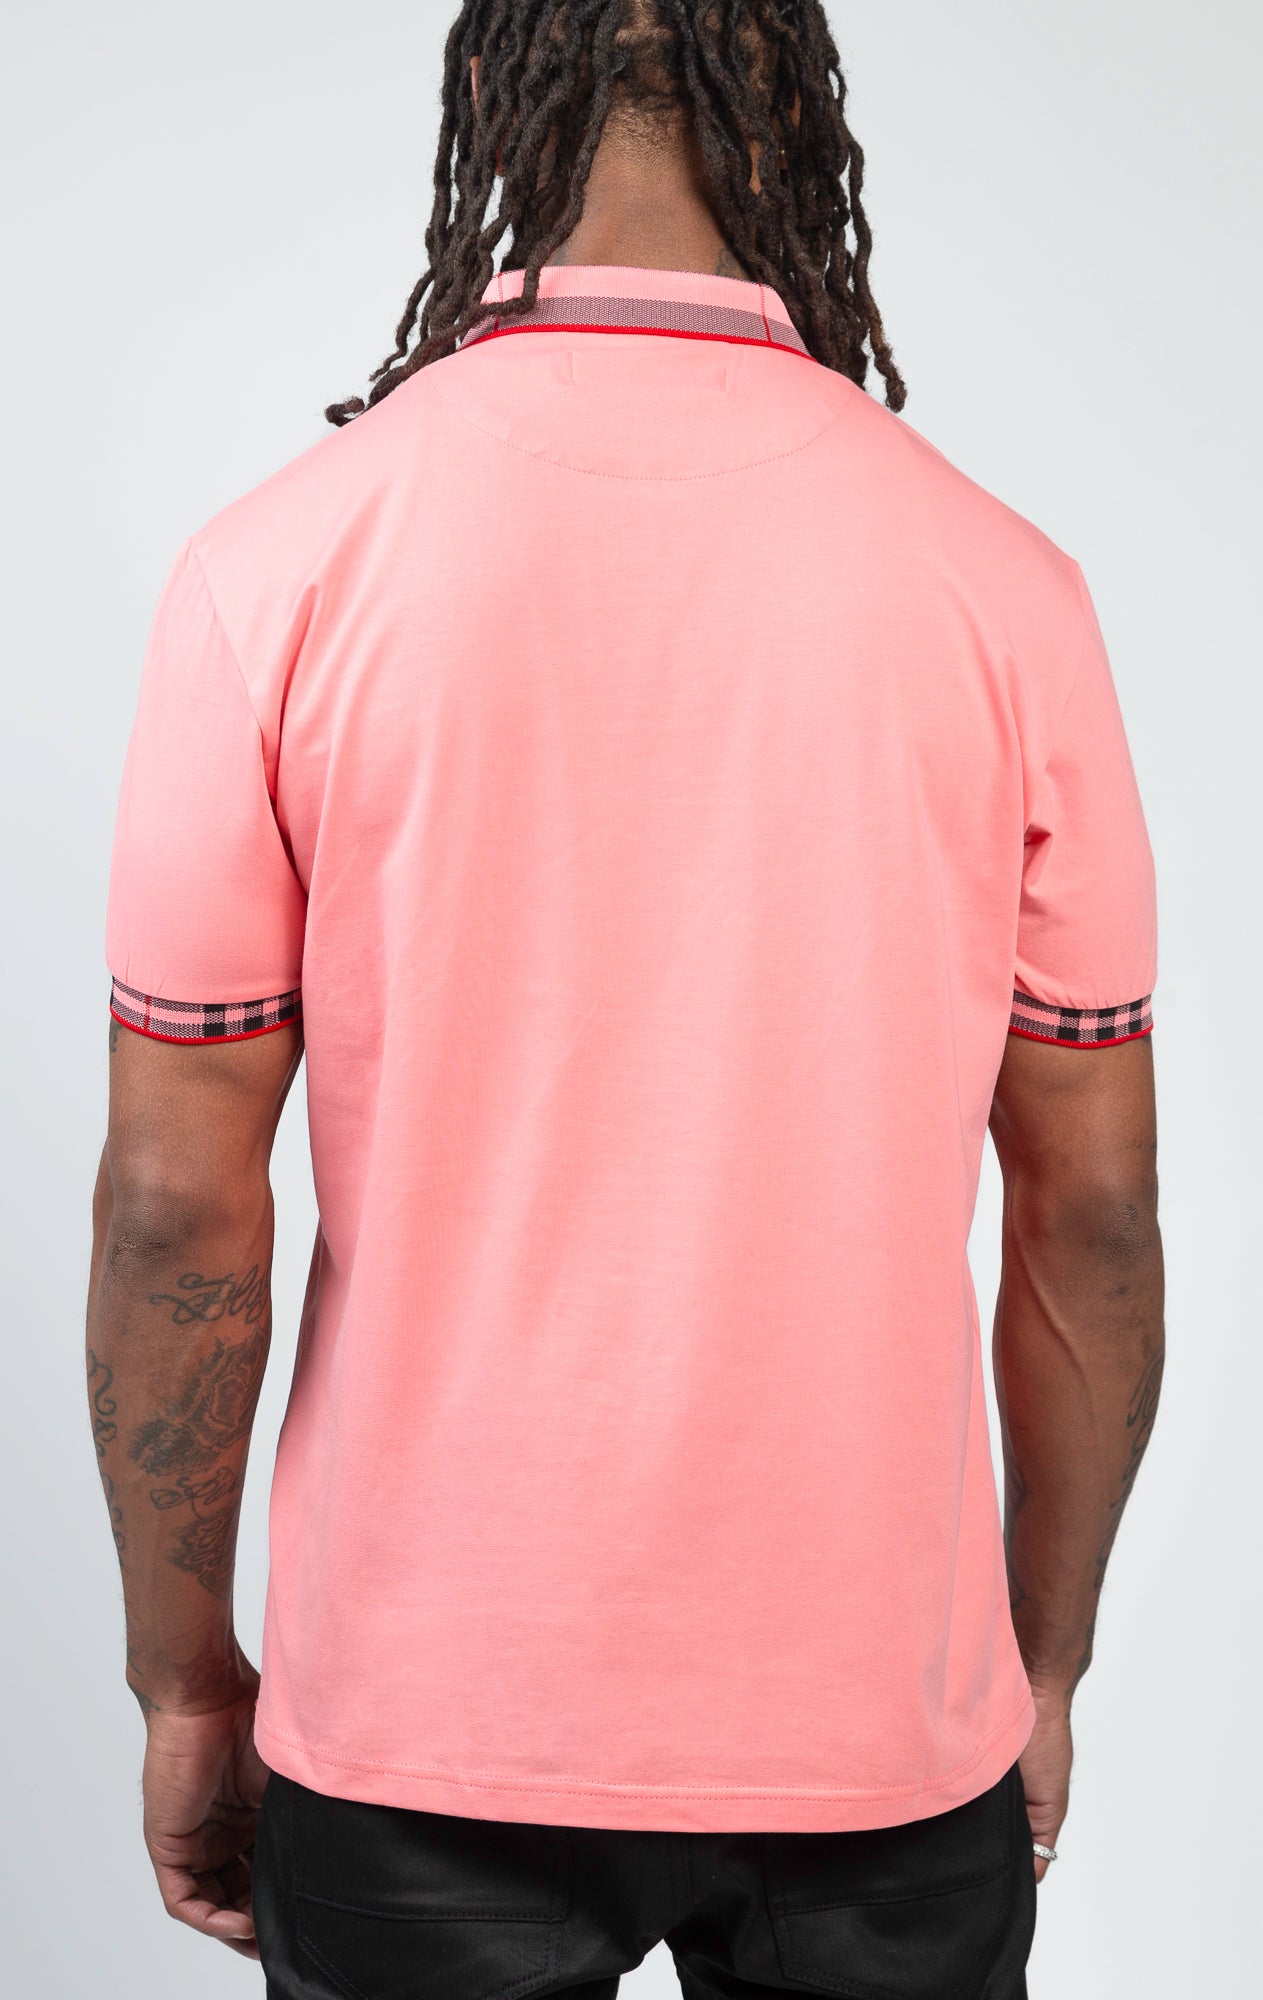 Short-sleeved polo shirt in vibrant coral color, featuring a modern front zipper.